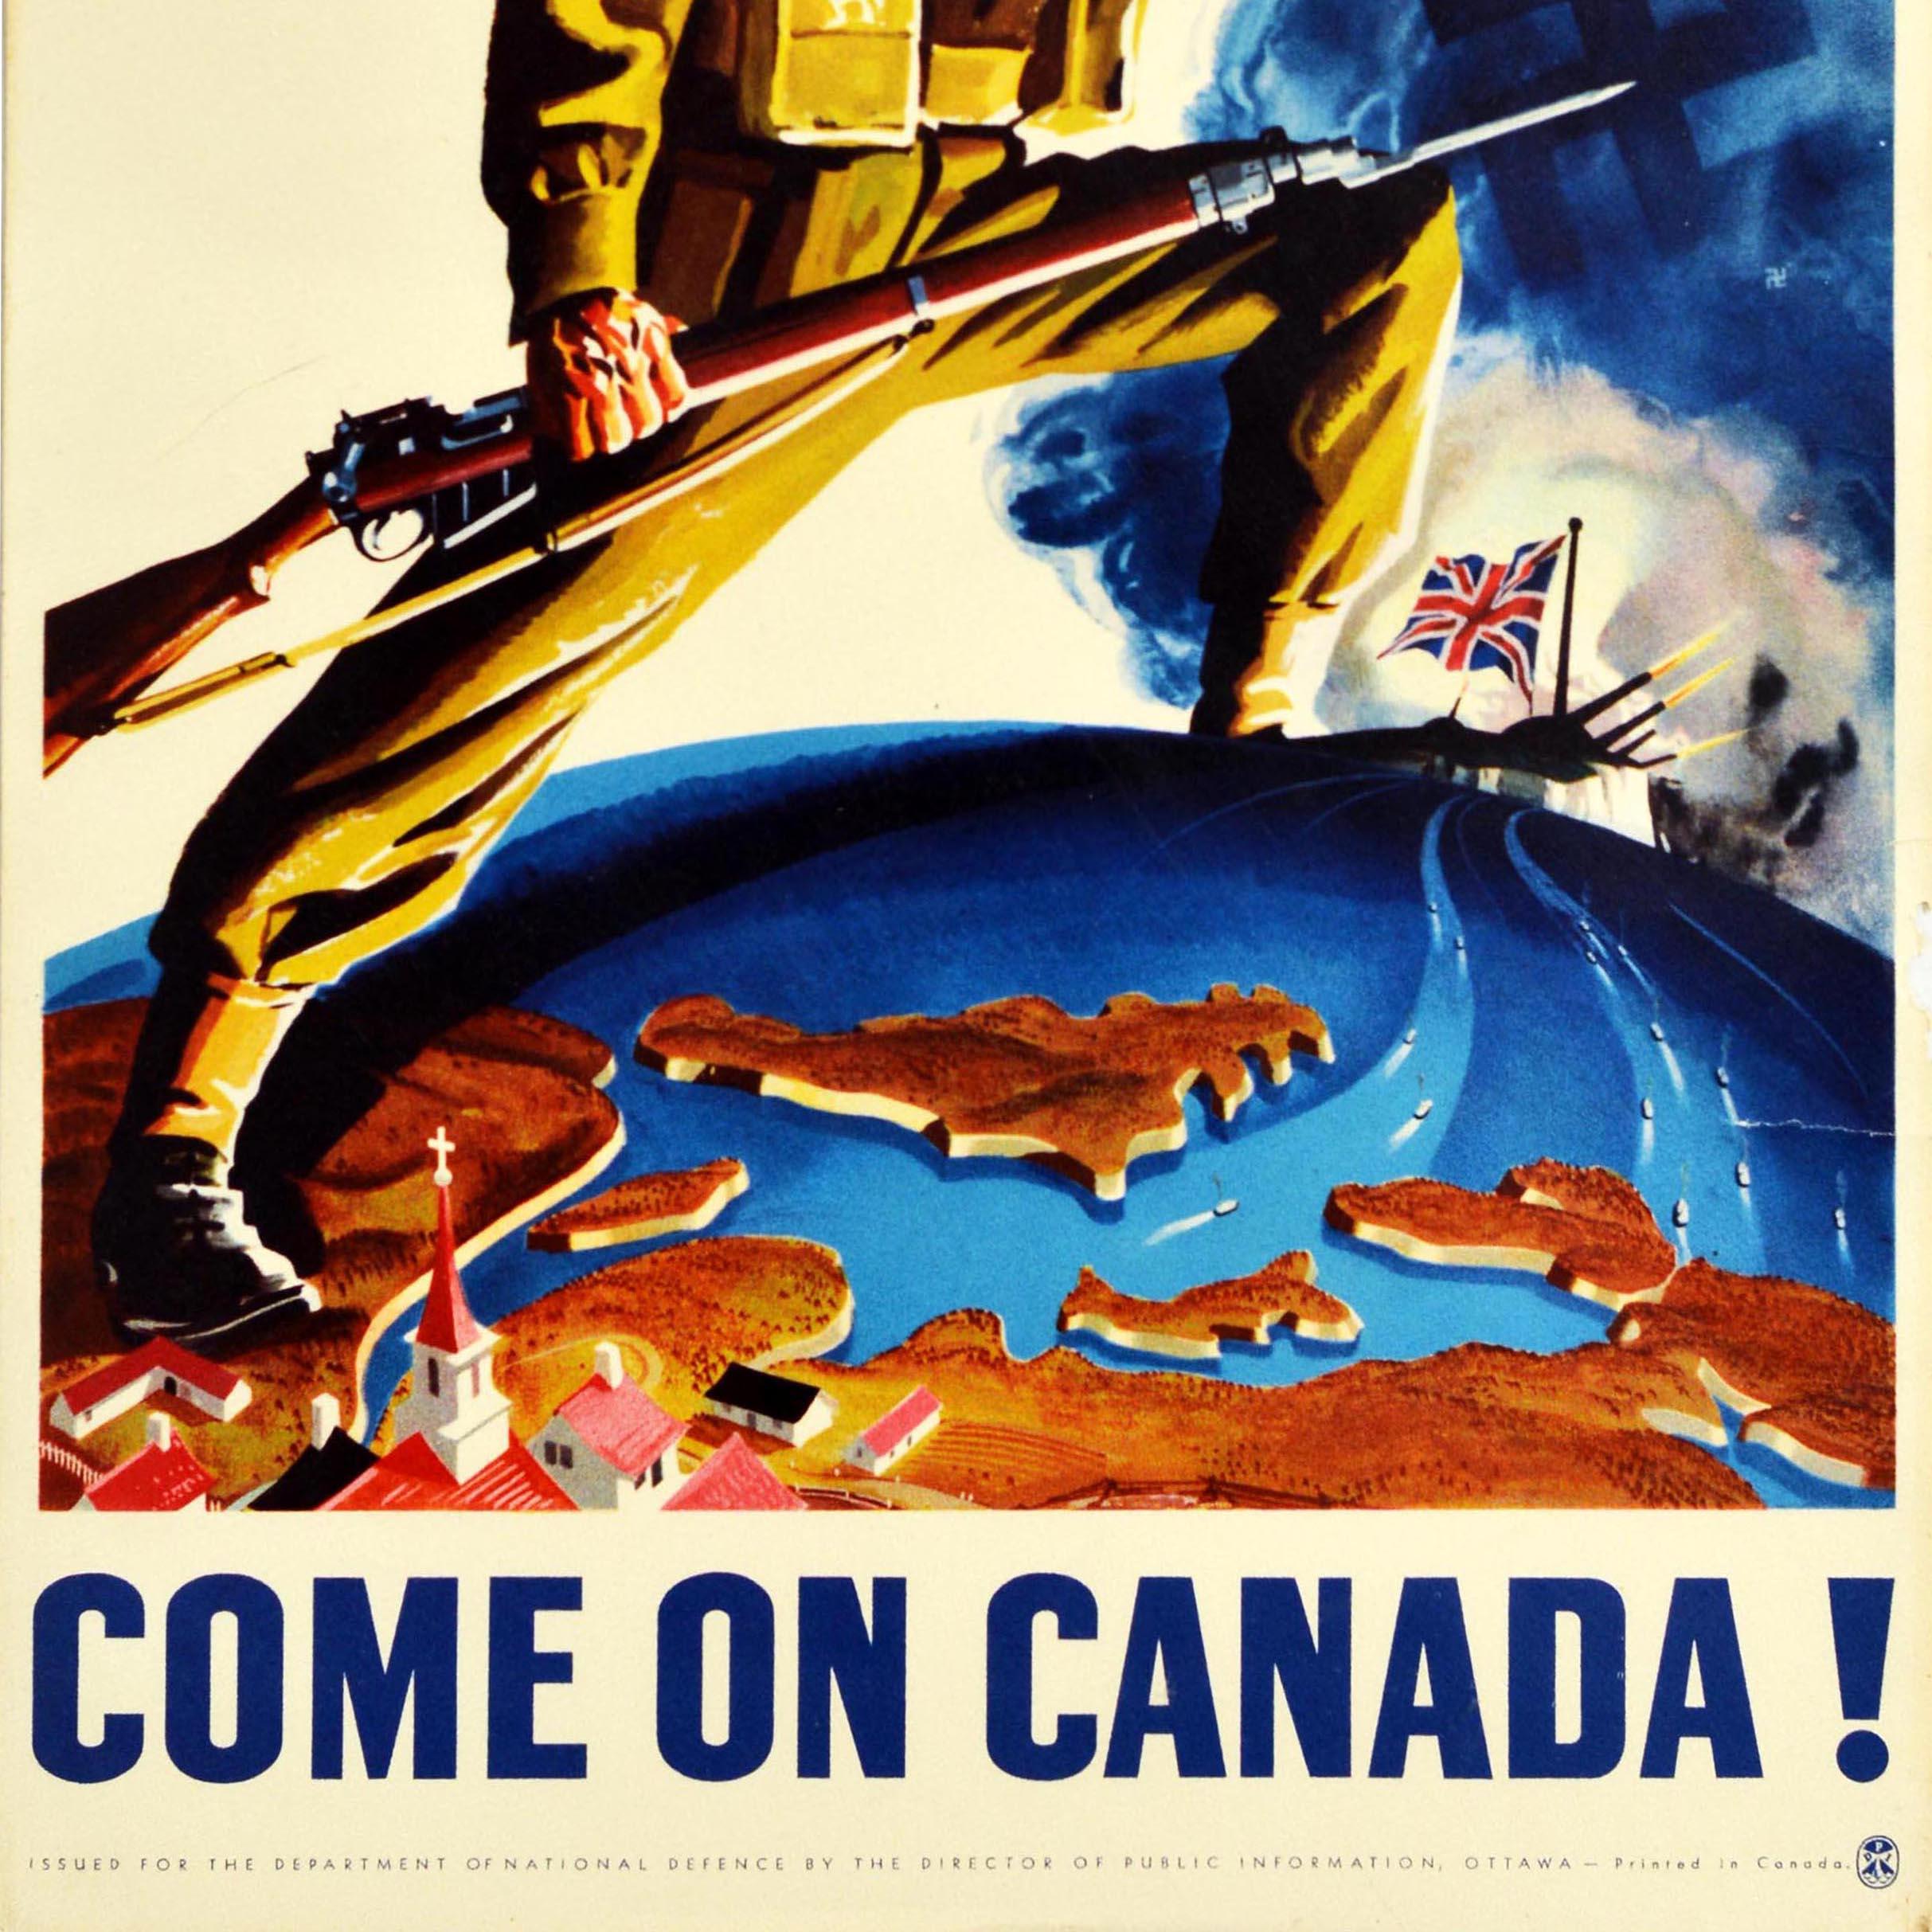 Original vintage World War Two poster - Lick Them Over There! Come On Canada! - featuring a dramatic image depicting soldier in uniform holding a bayonet rifle gun in one hand and looking at the viewer, pointing towards Nazi German Swastika symbols